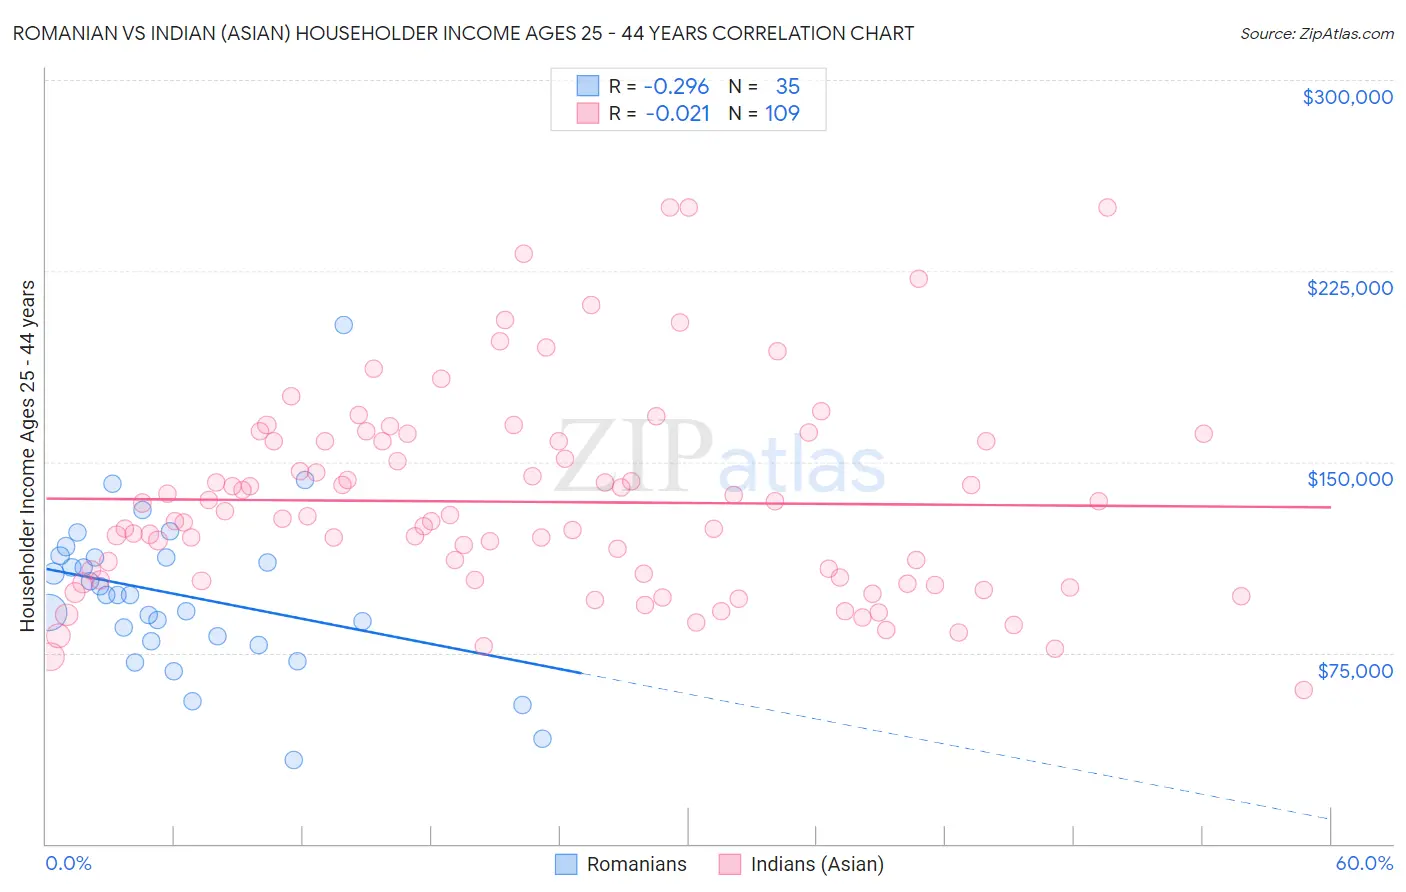 Romanian vs Indian (Asian) Householder Income Ages 25 - 44 years